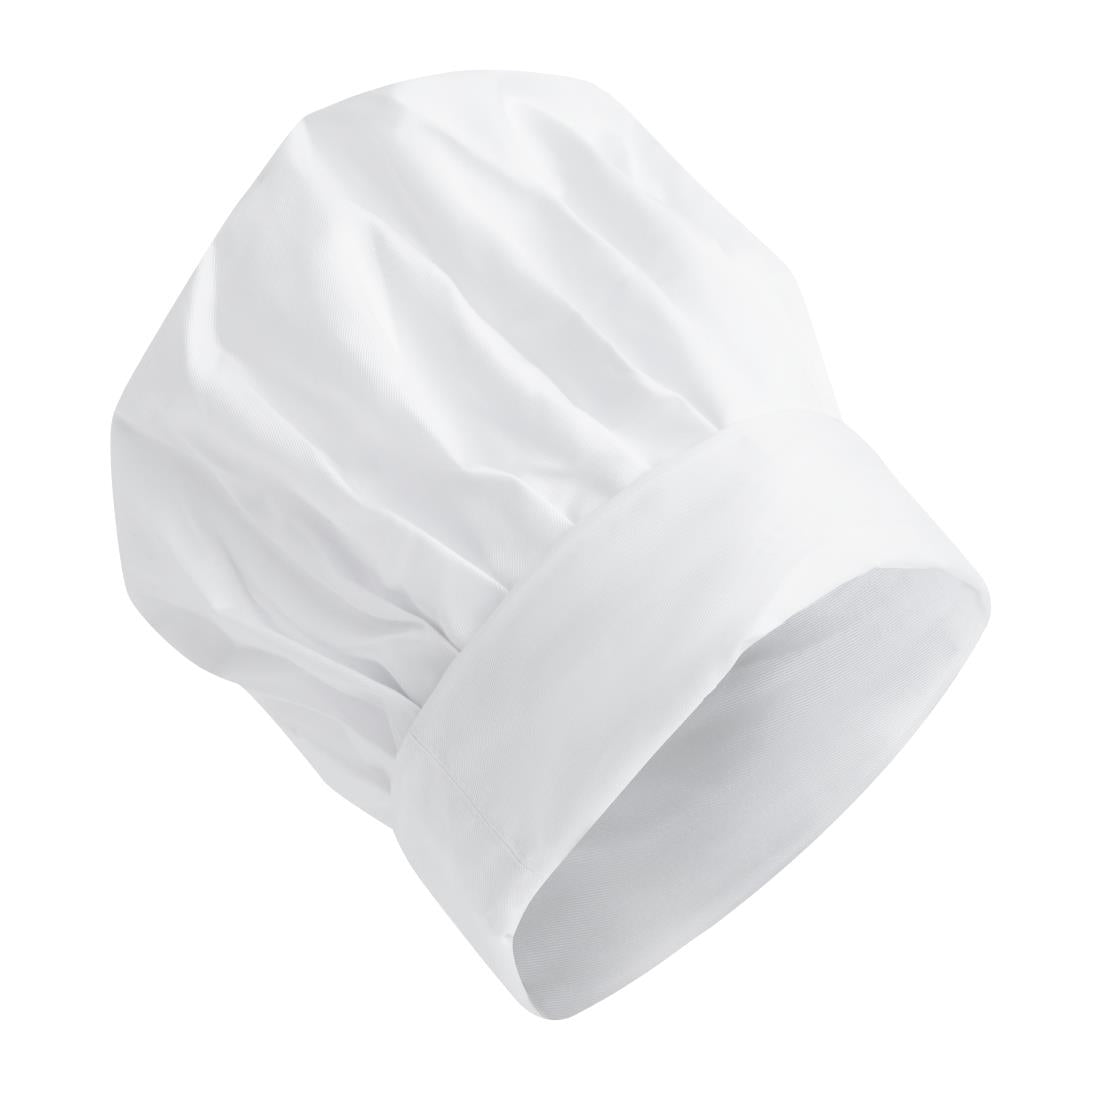 A200-M Whites Tallboy Unisex Hat M JD Catering Equipment Solutions Ltd